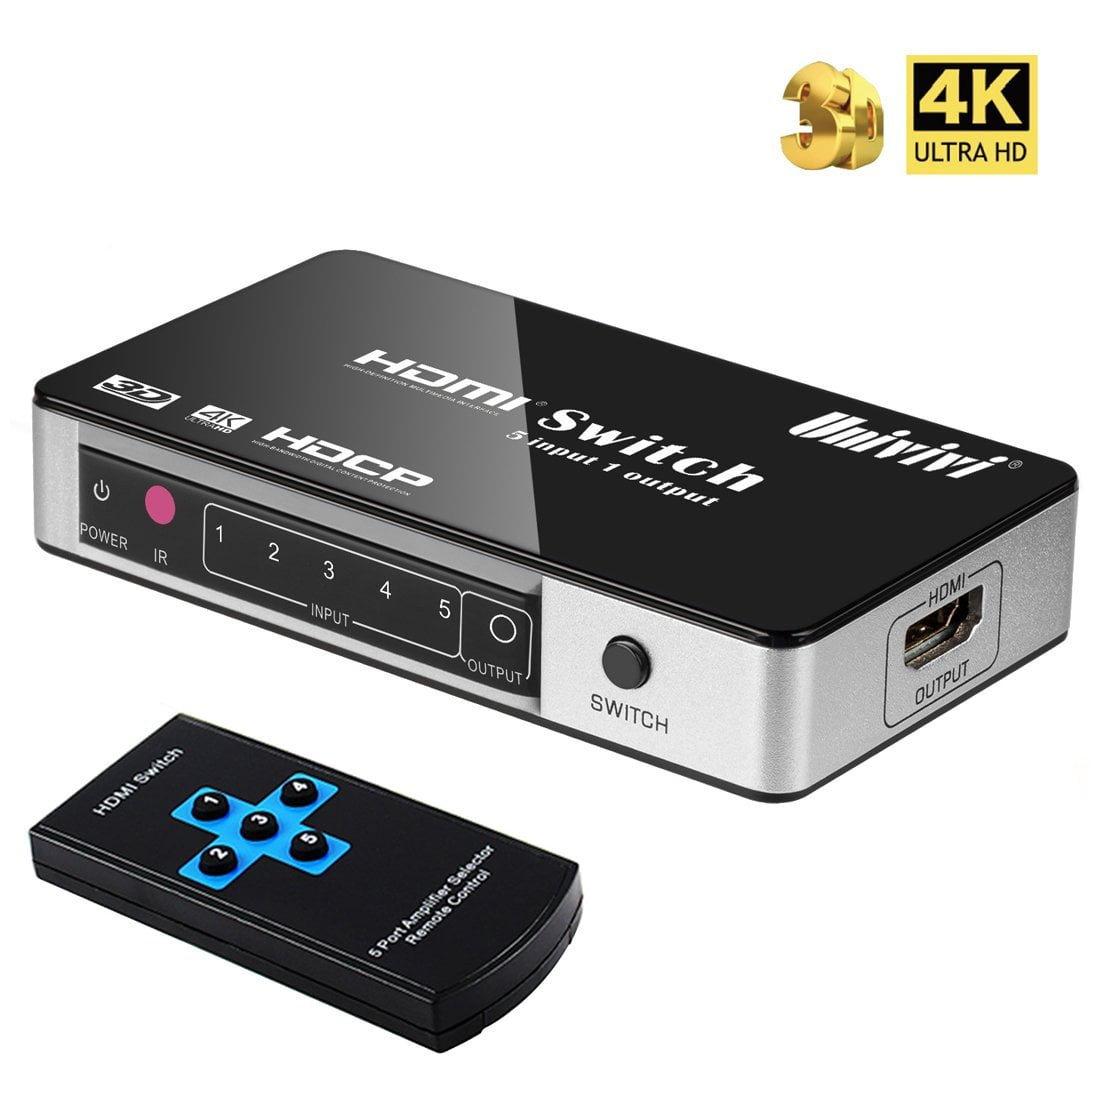 HDMI Switch 4k GANA HDMI Switcher 5-Port HDMI Splitter Box with Remote Control and 4K/1080p/3D Supported